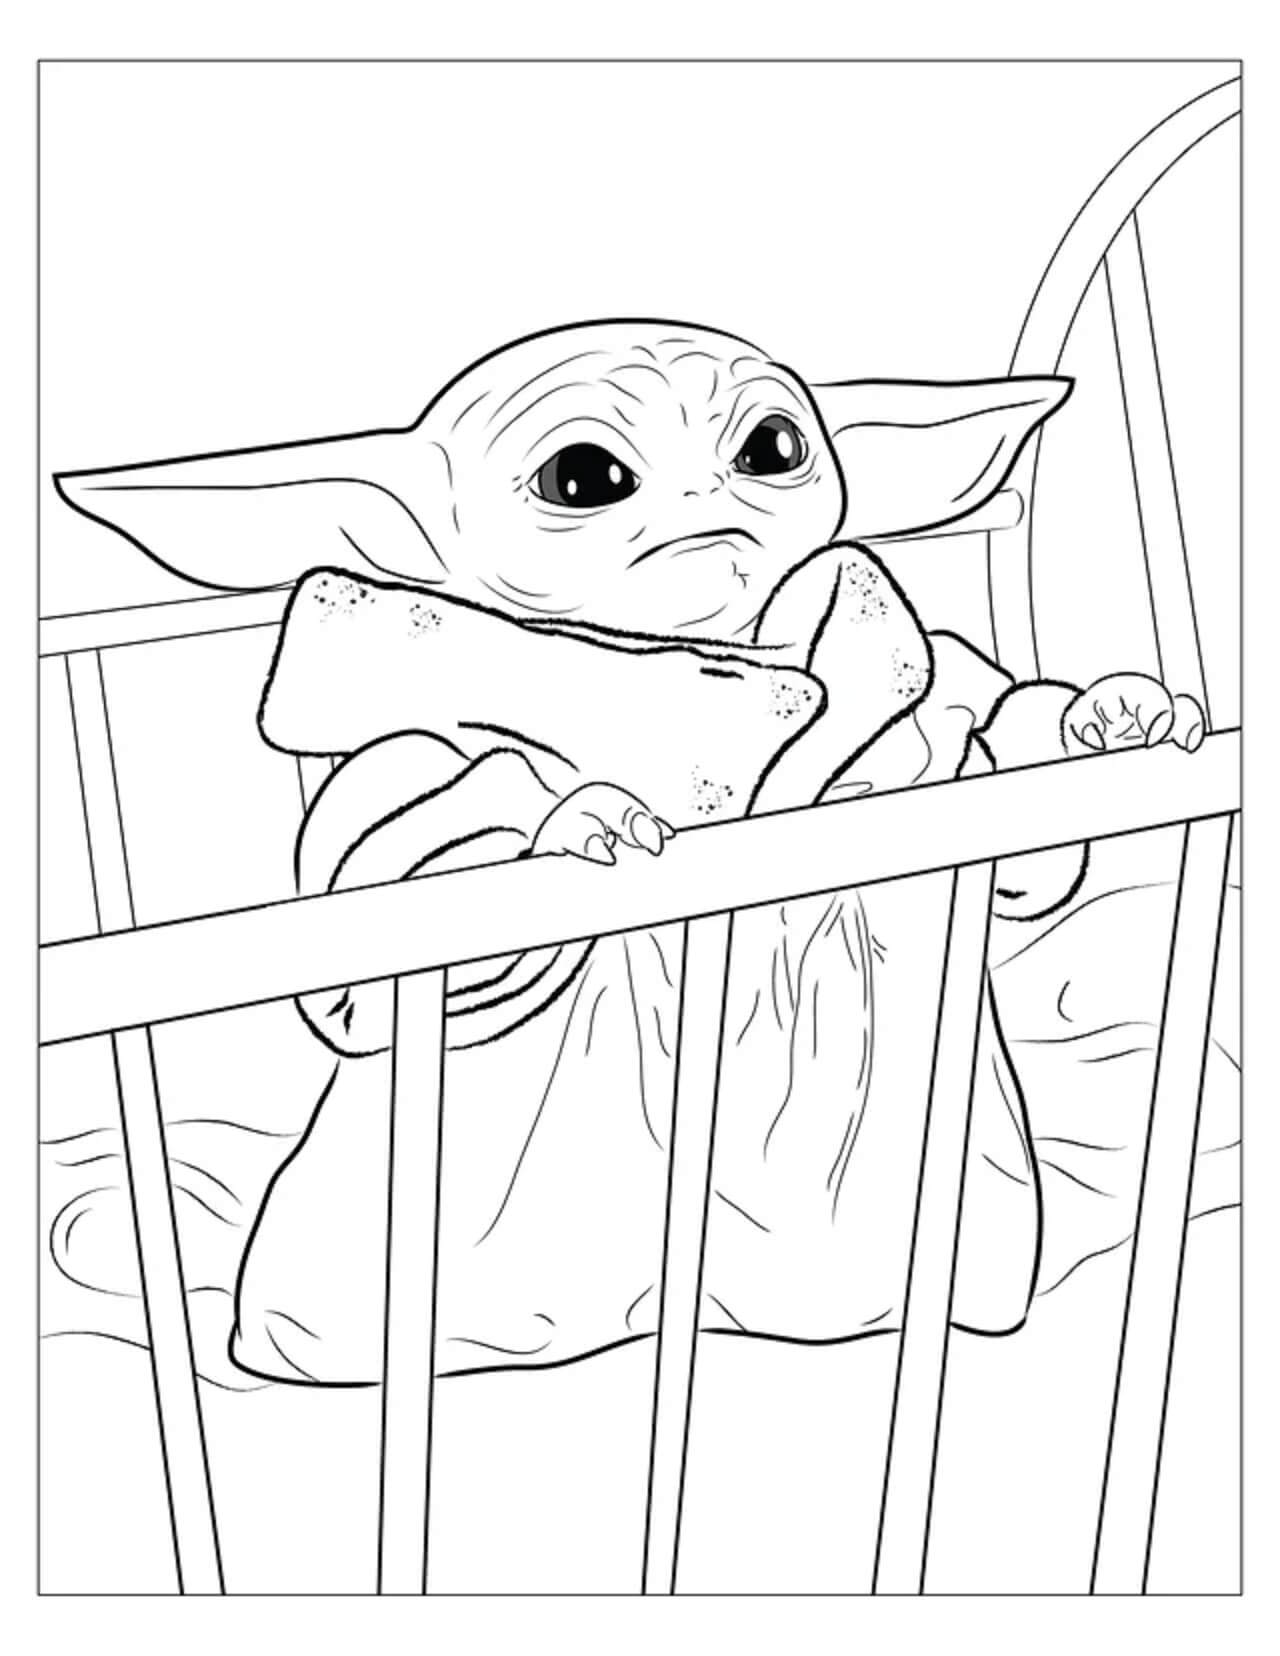 Baby Yoda in the Cradle